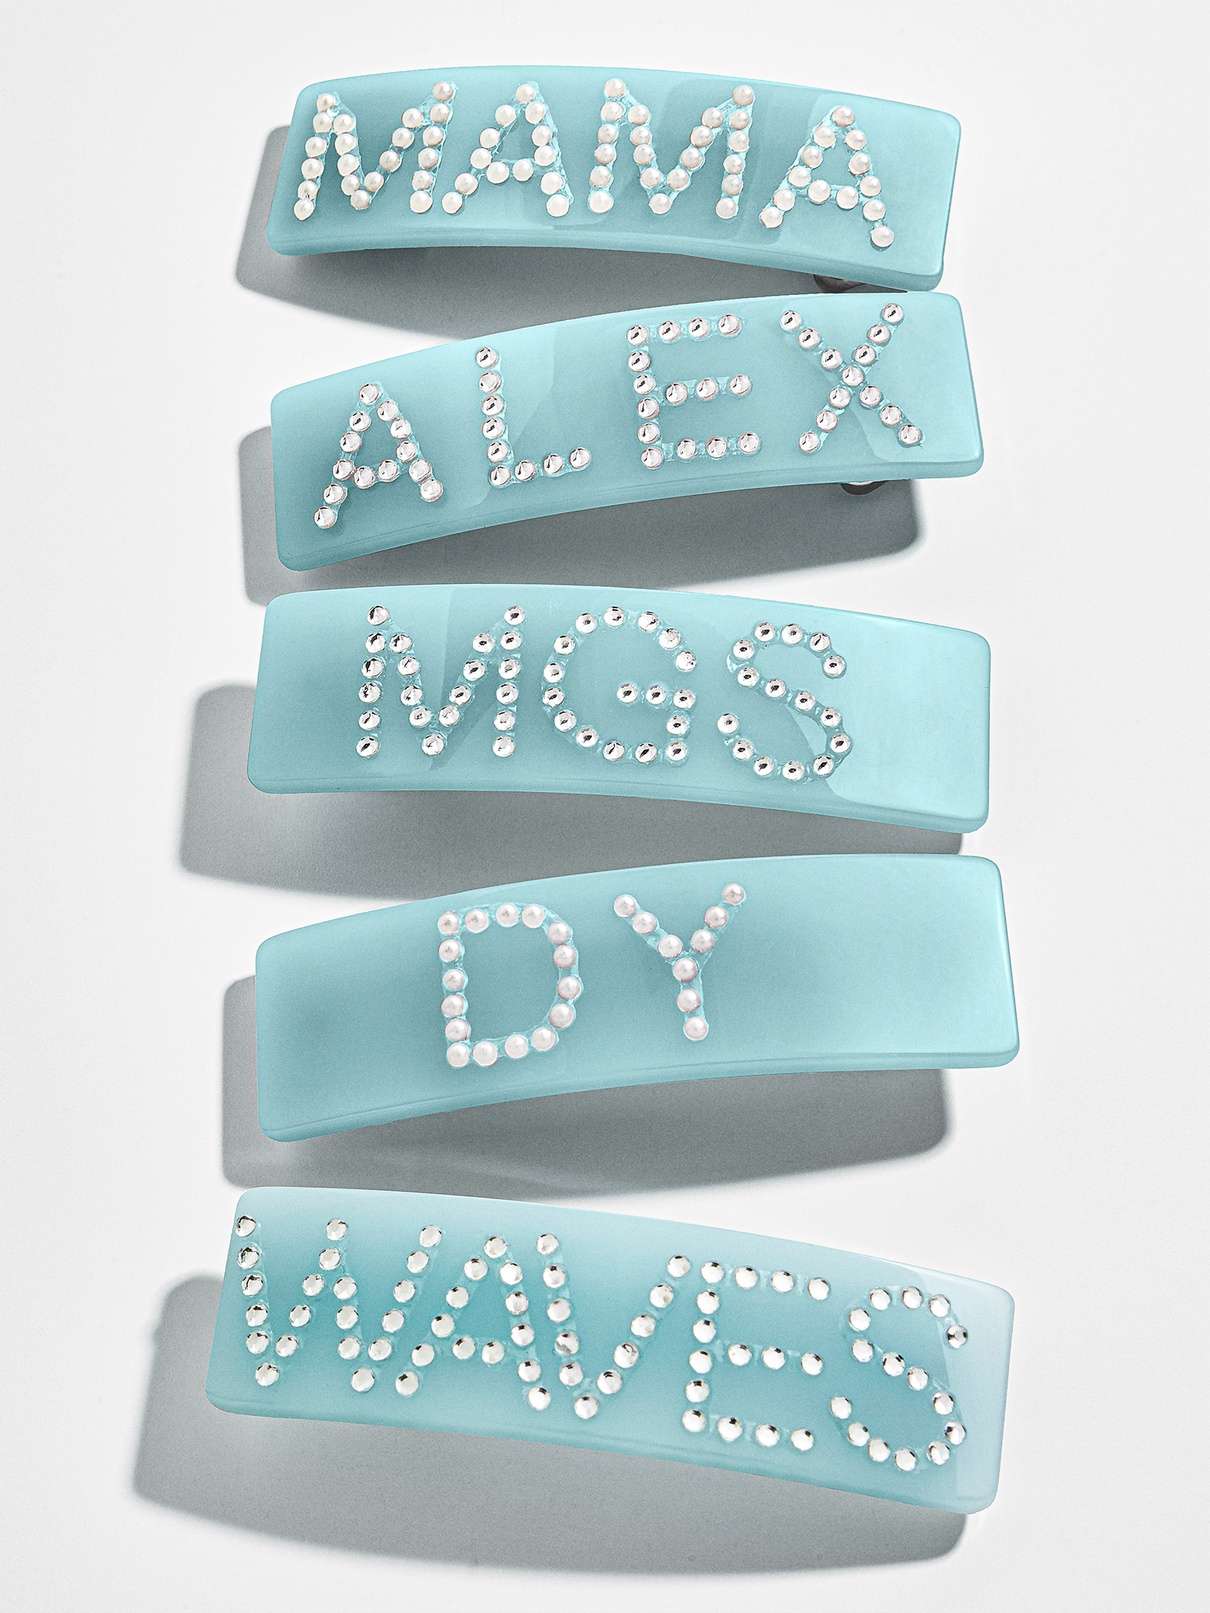 hair clips that say mama, alex, mgs, dy, waves